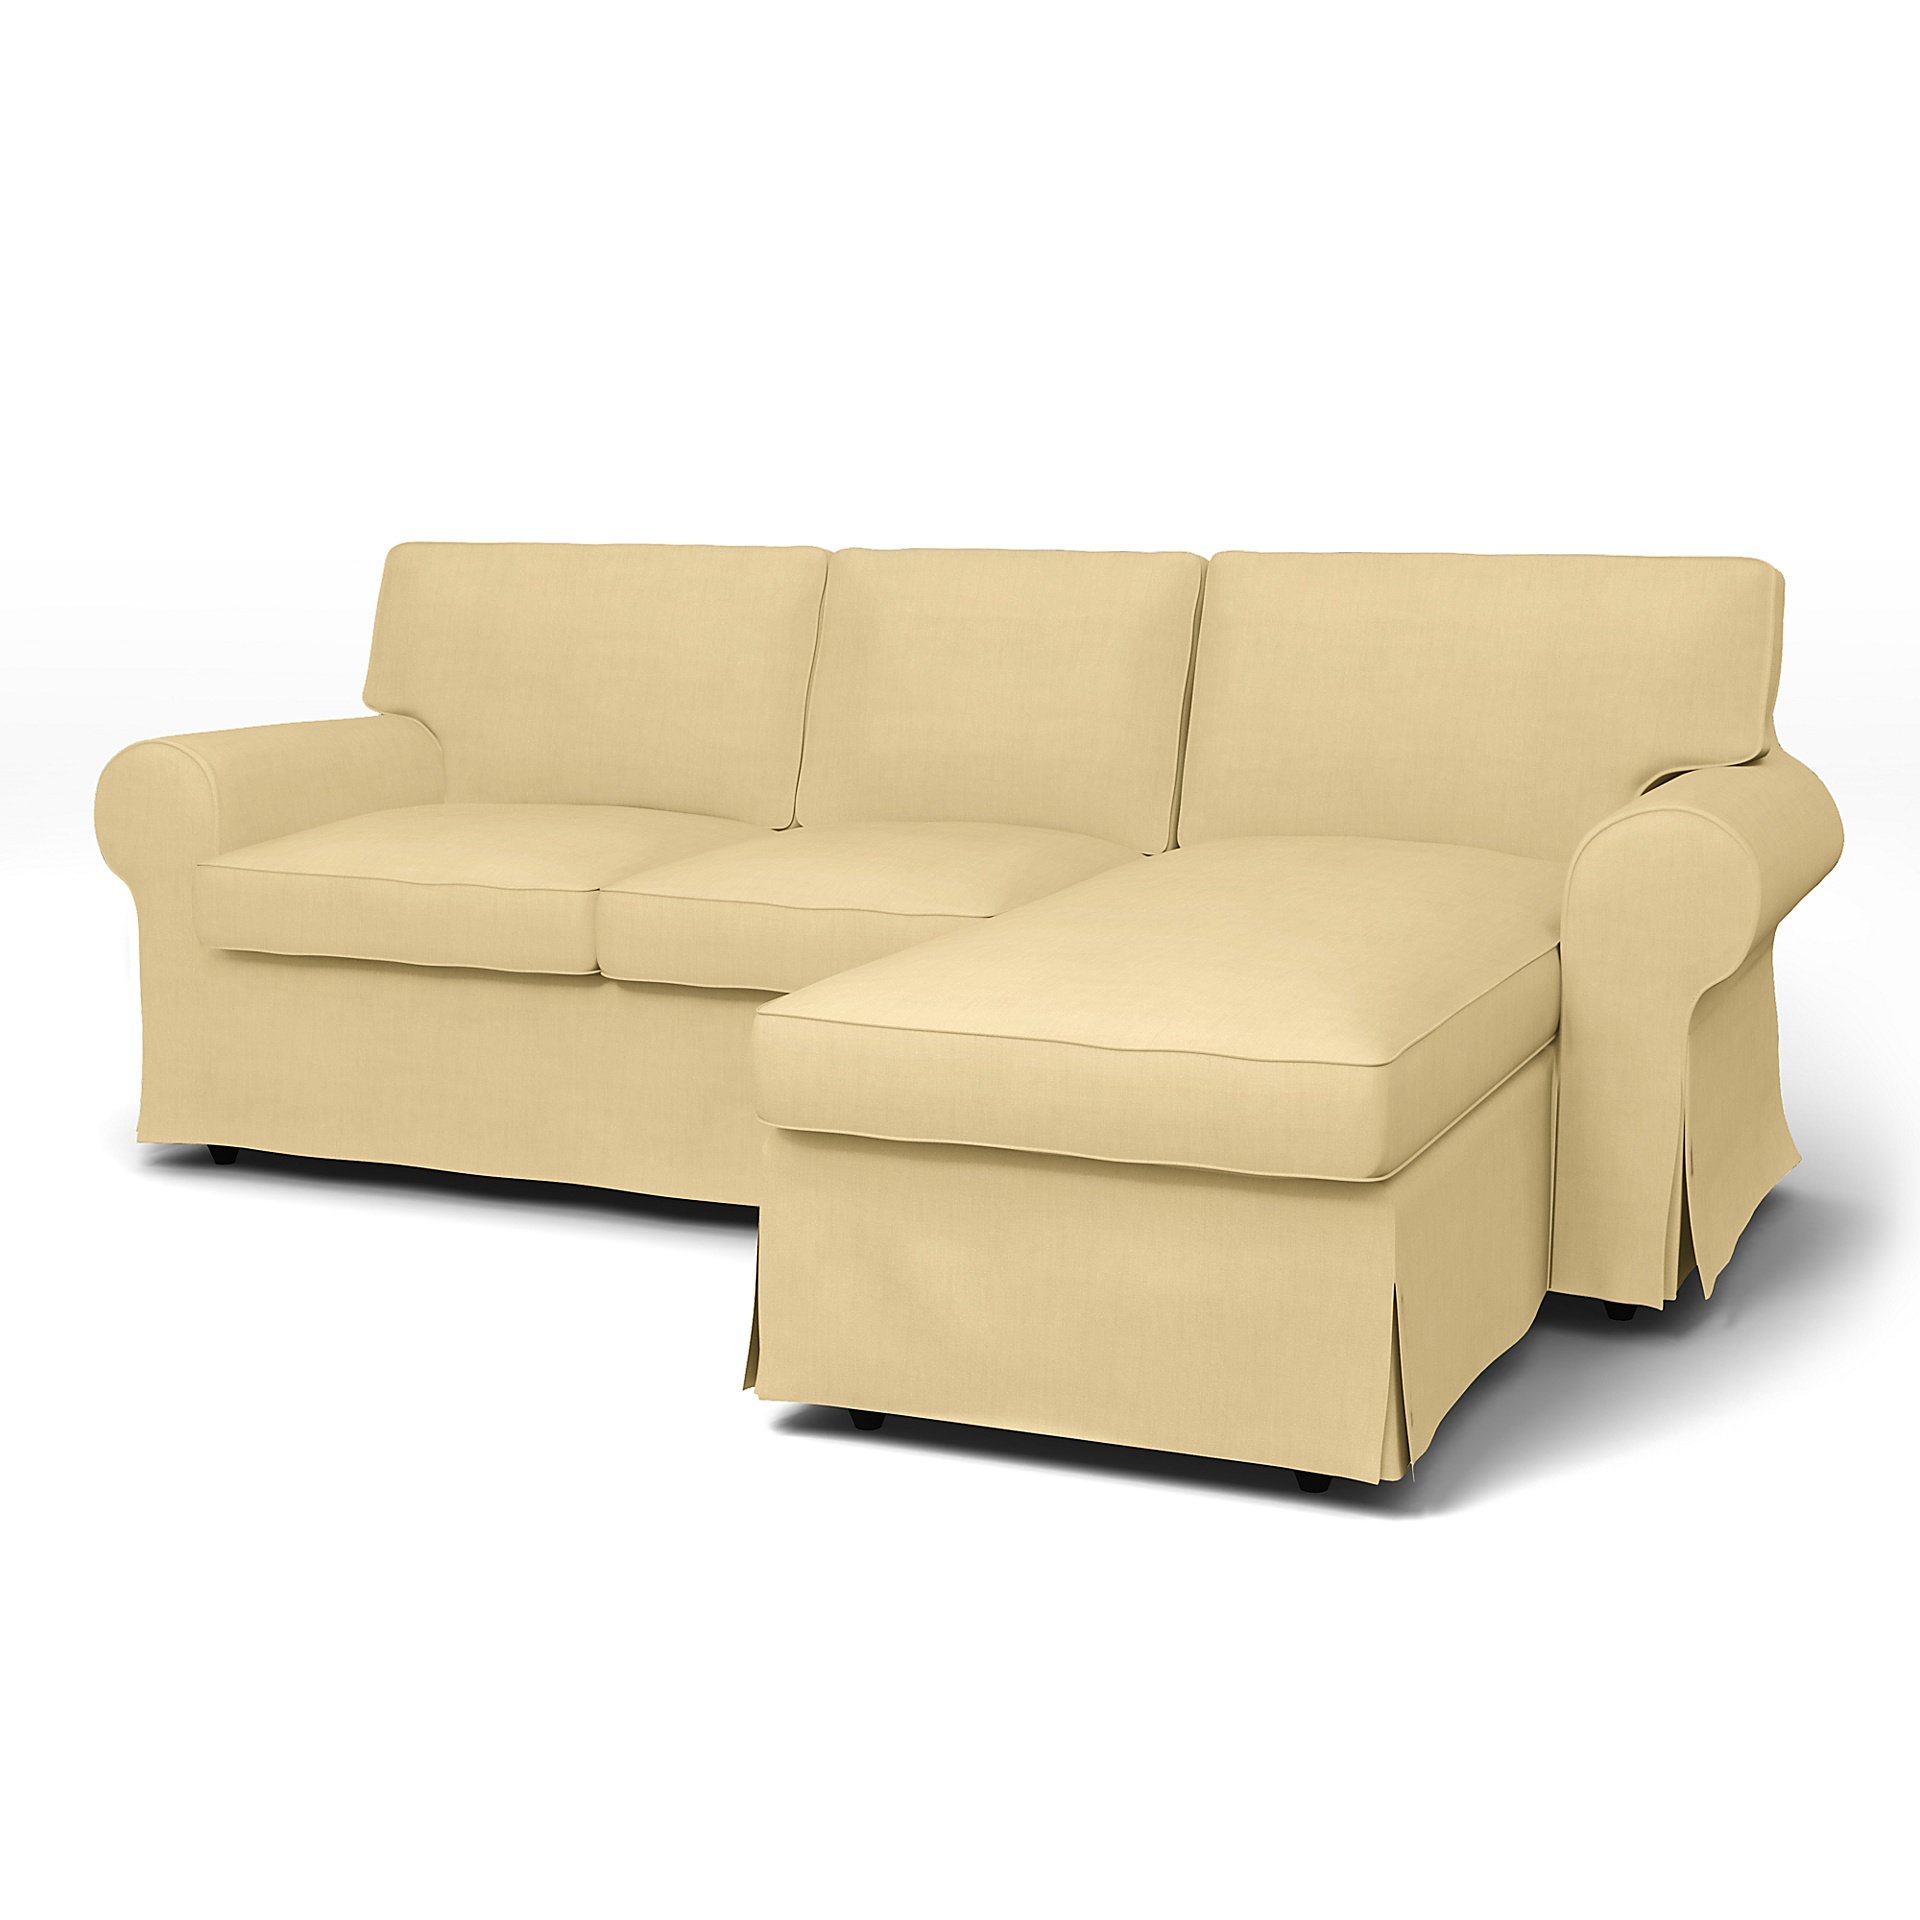 IKEA - Ektorp 3 Seater Sofa with Chaise Cover, Straw Yellow, Linen - Bemz